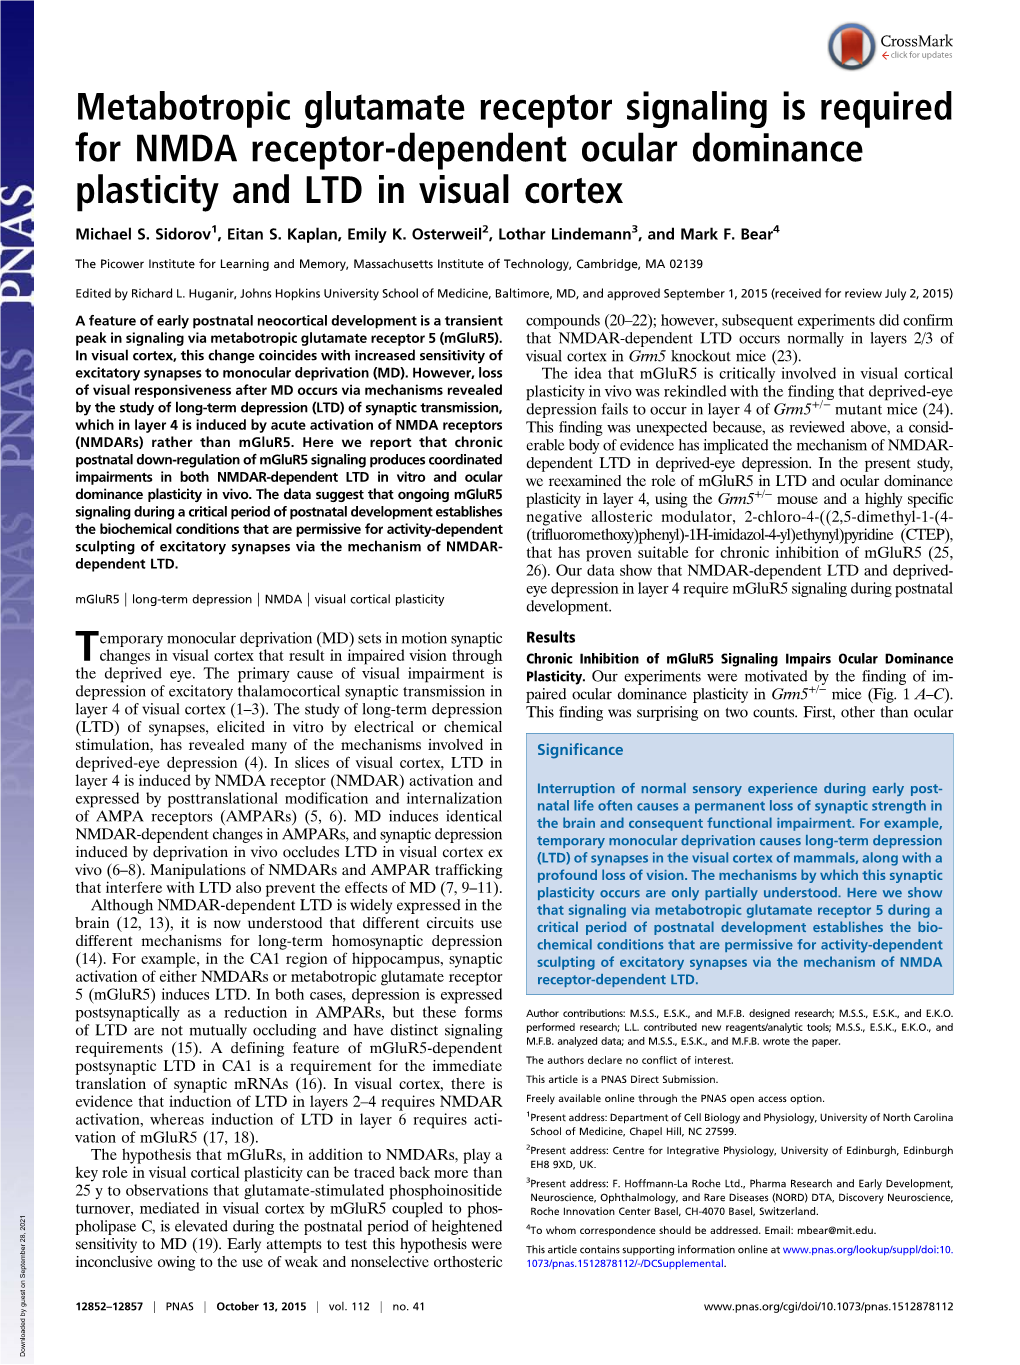 Metabotropic Glutamate Receptor Signaling Is Required for NMDA Receptor-Dependent Ocular Dominance Plasticity and LTD in Visual Cortex